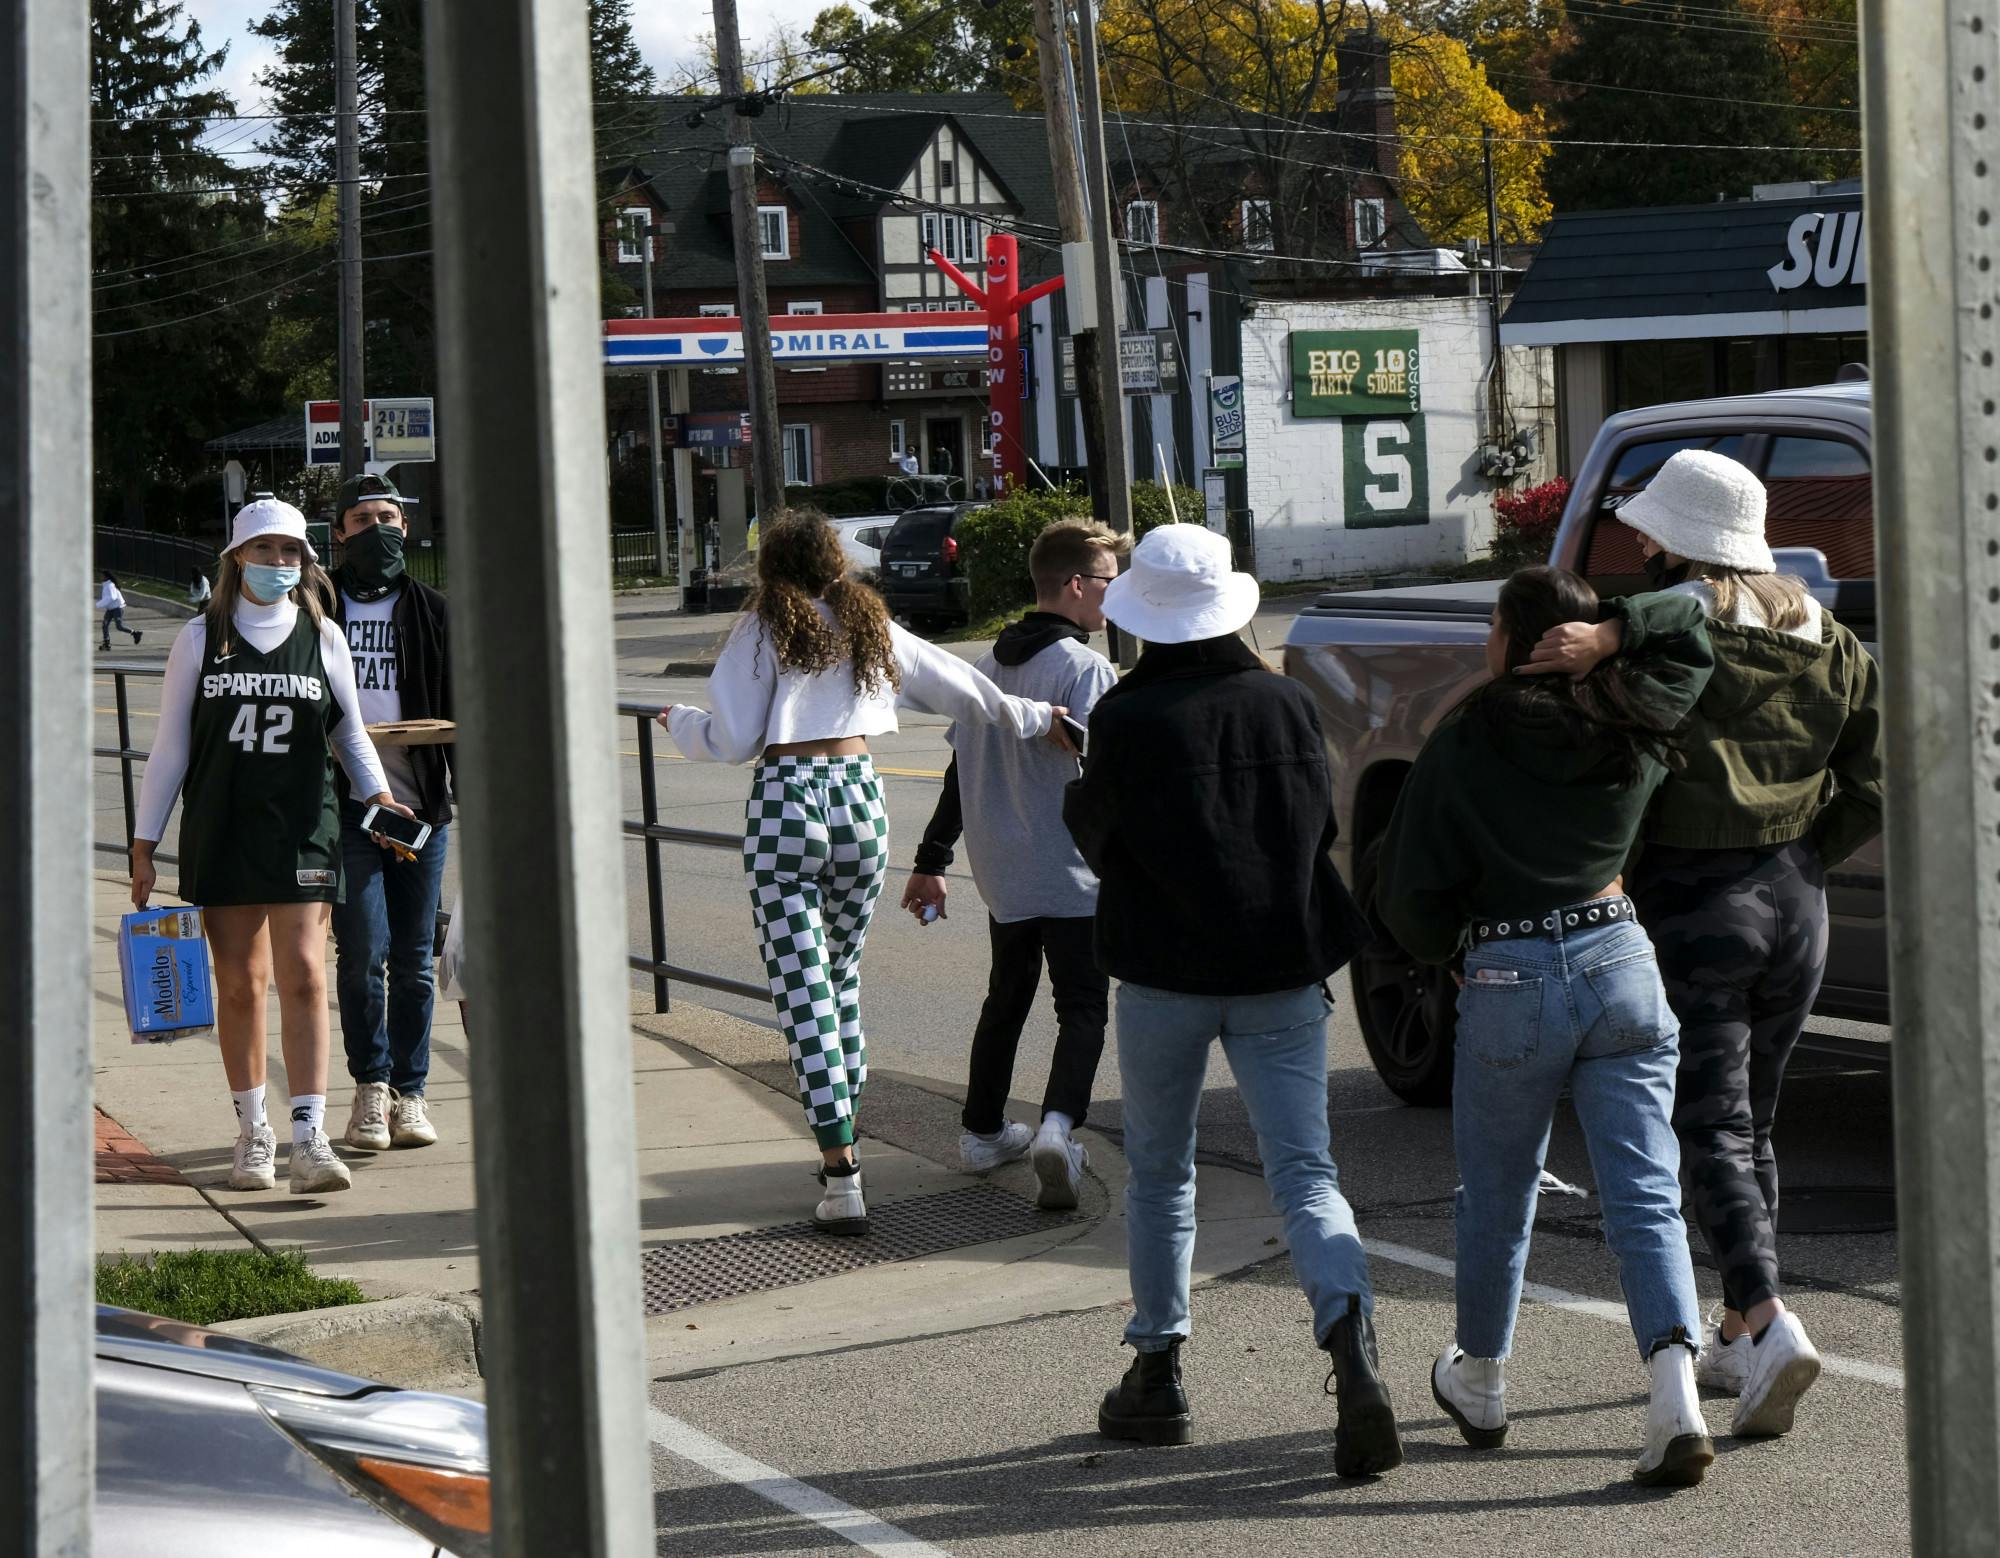 Green and white adorning MSU football fans roaming the streets during MSU's first football game among Coronavirus conditions on October 24, 2020.